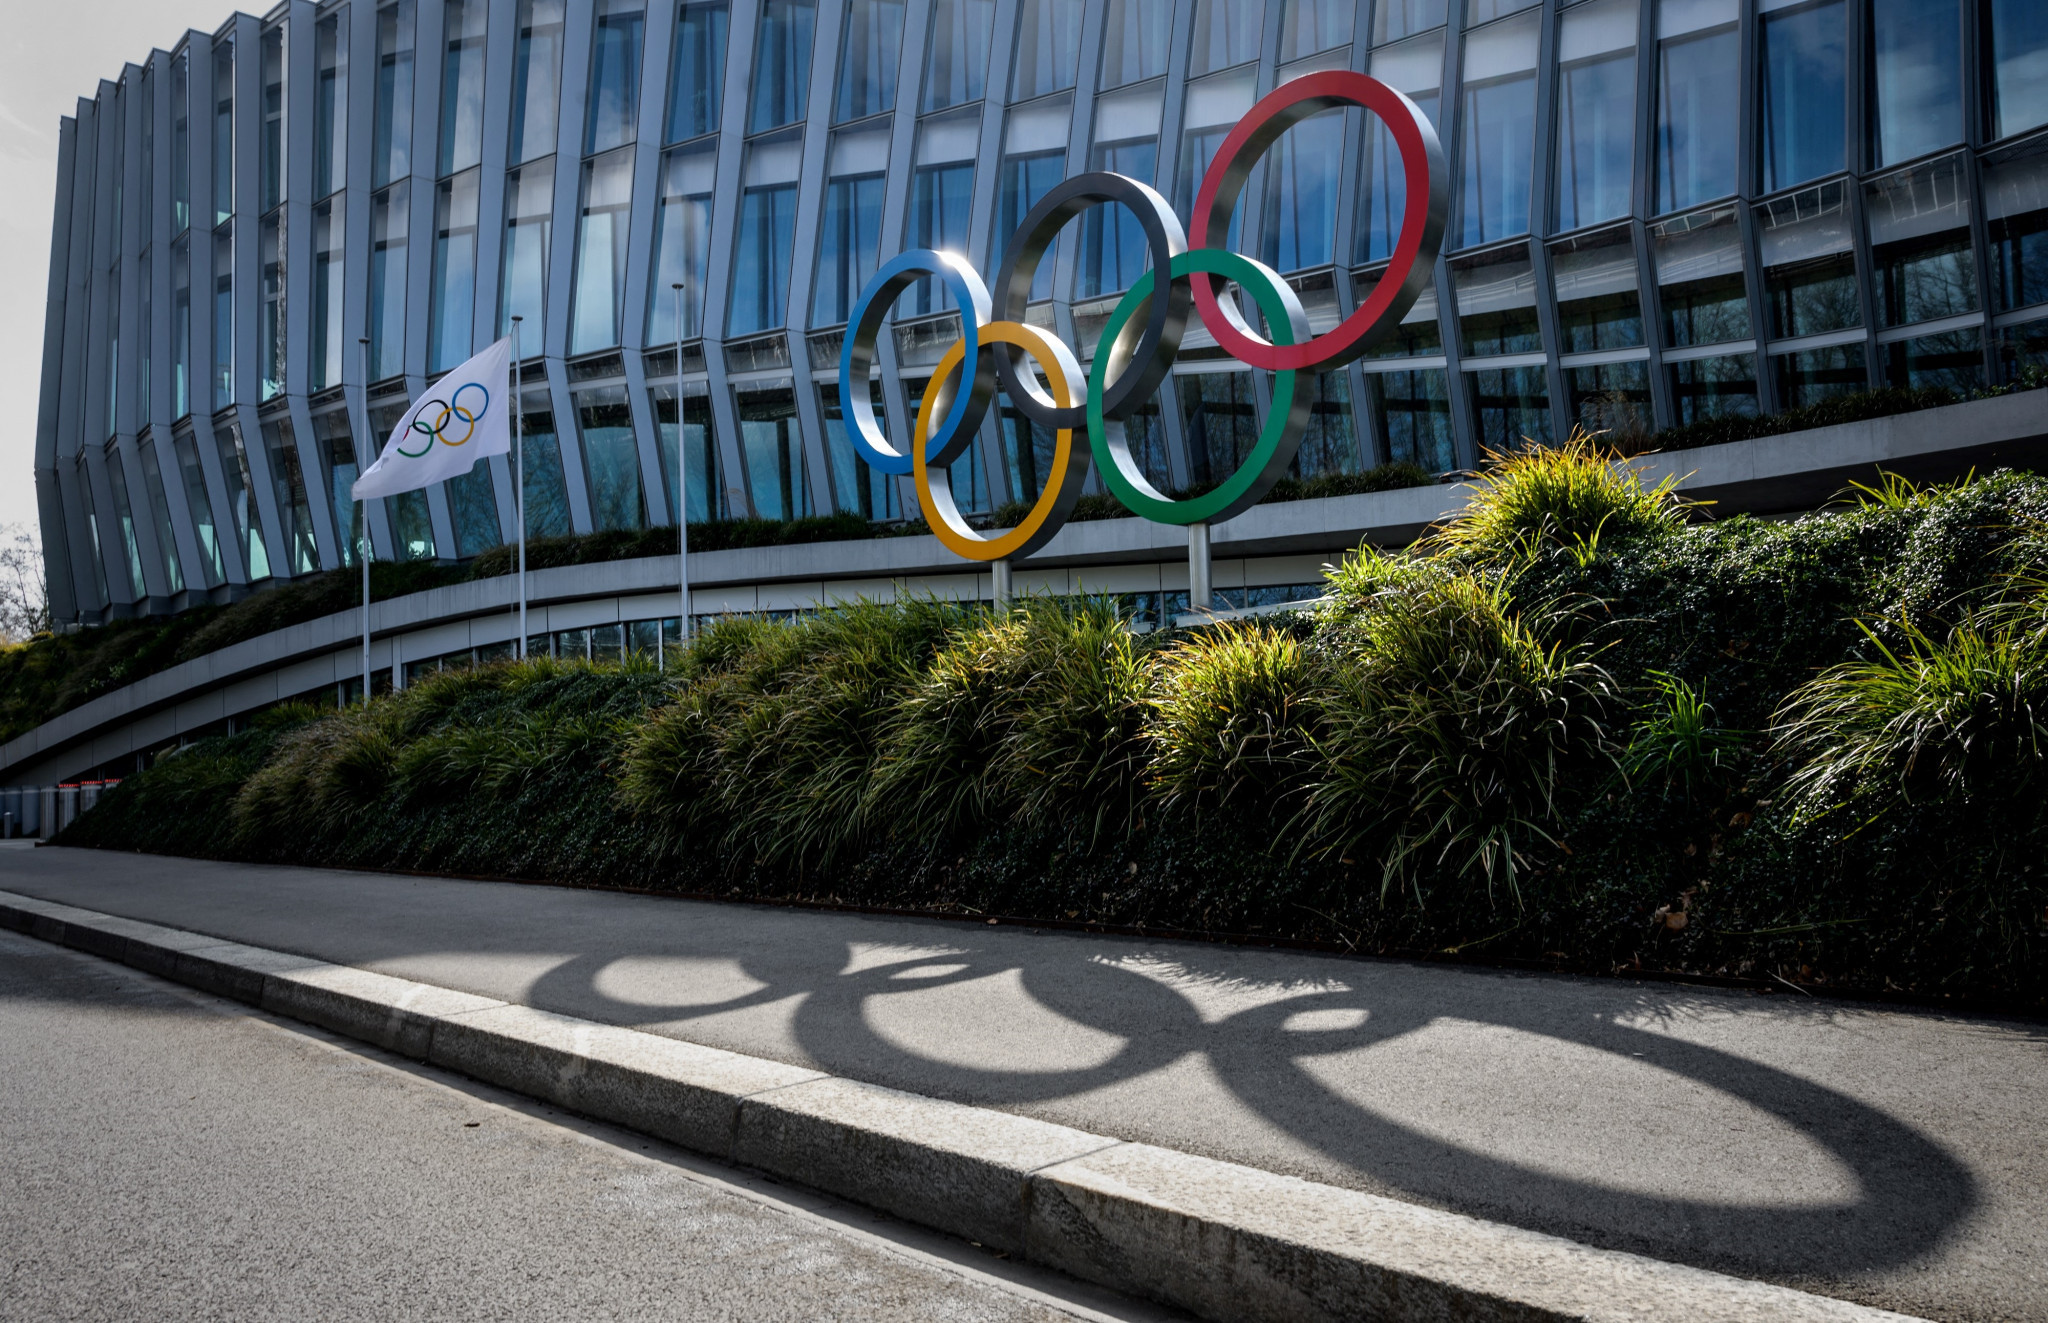 IOC hopes that British Government "respect autonomy of sport" over Russia stance